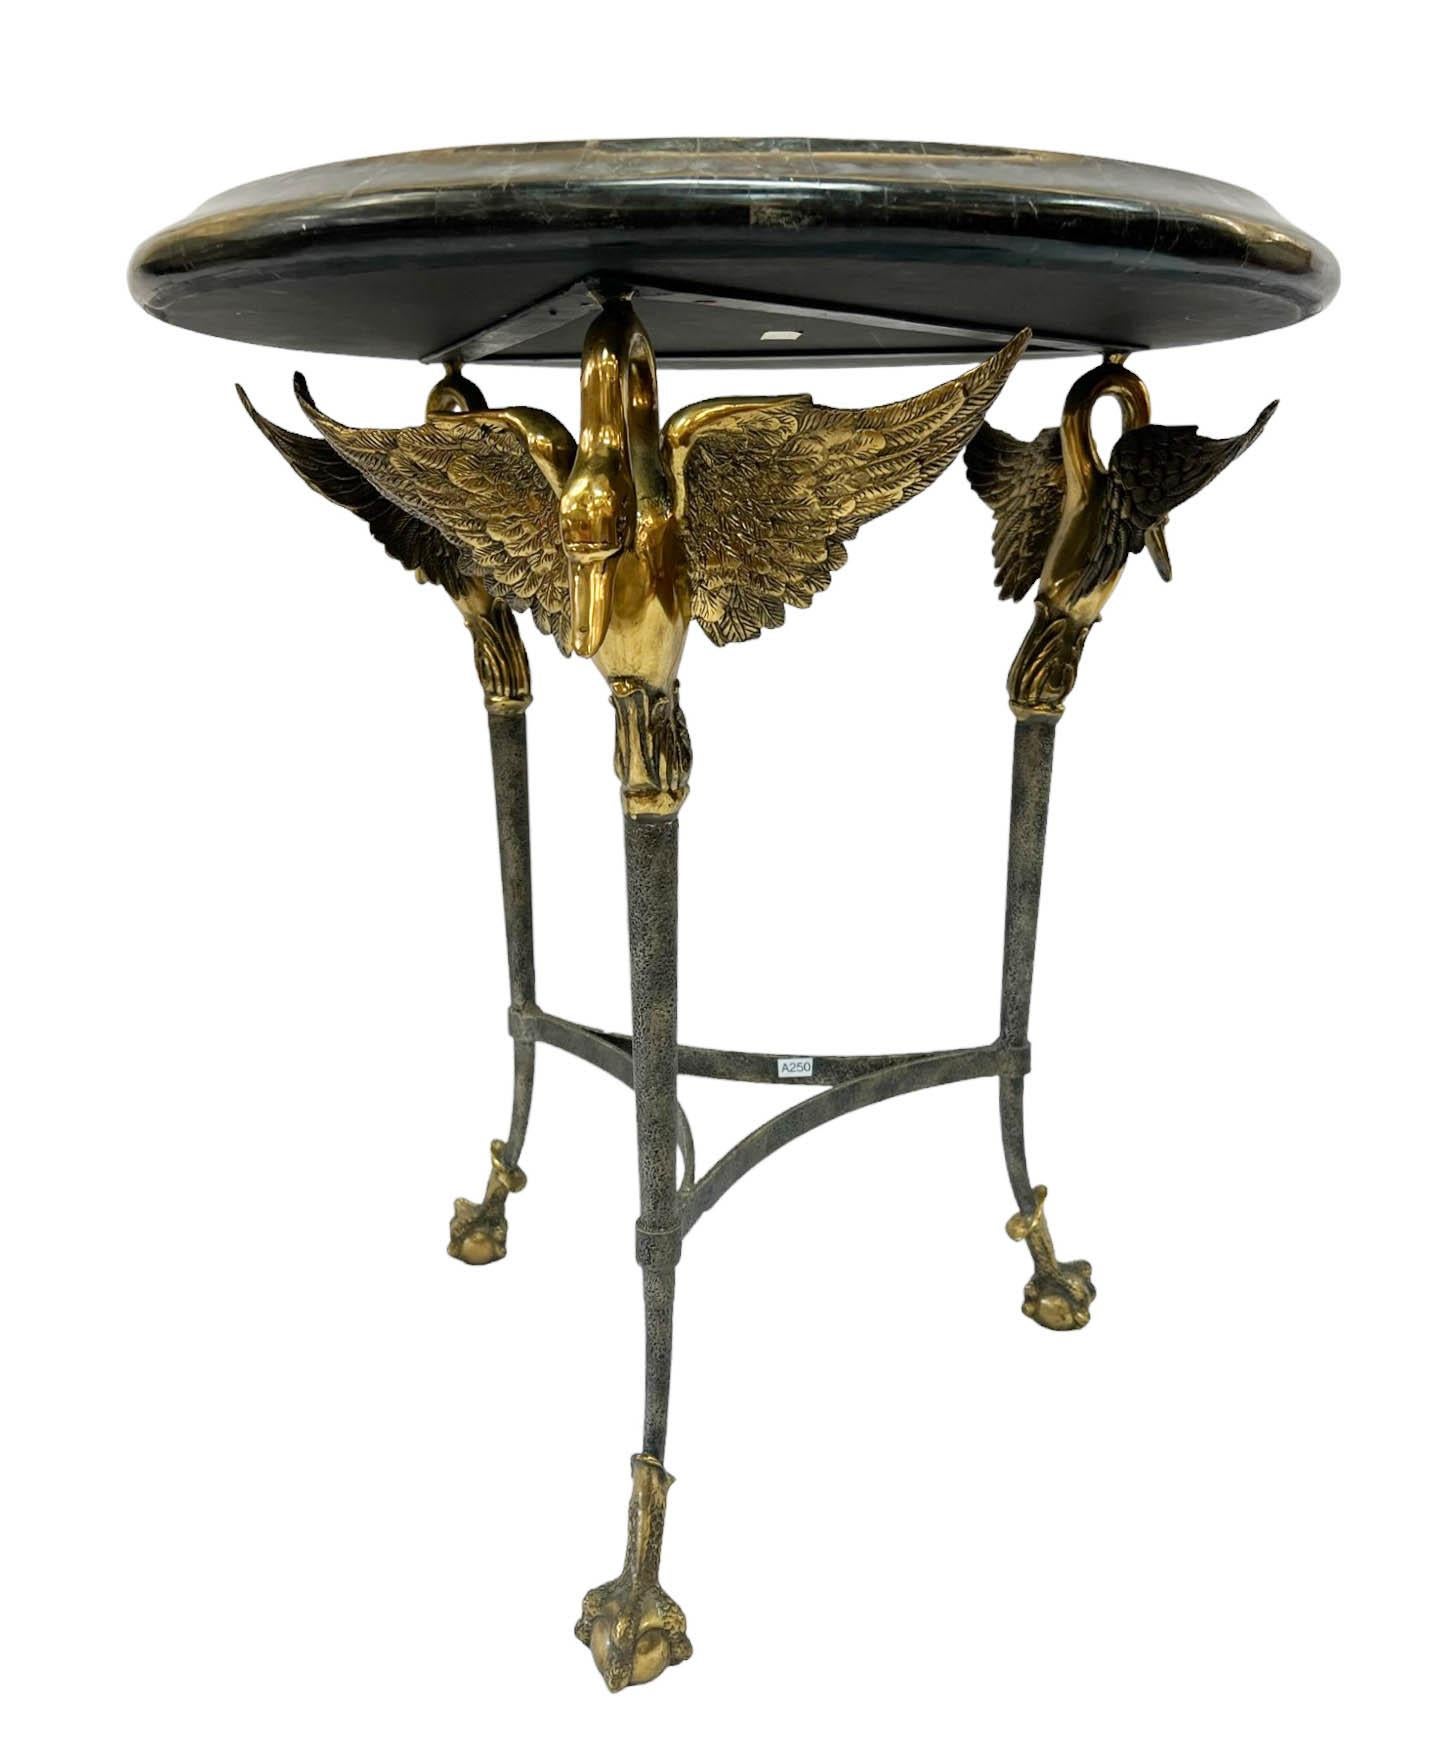 Beautiful neoclassically styled occasional table by Maitland Smith. The table features a marble marquetry inlay top supported by three swan-footed legs. A magnificent open-winged brass swan crowns each table leg. This piece will add elegance to any